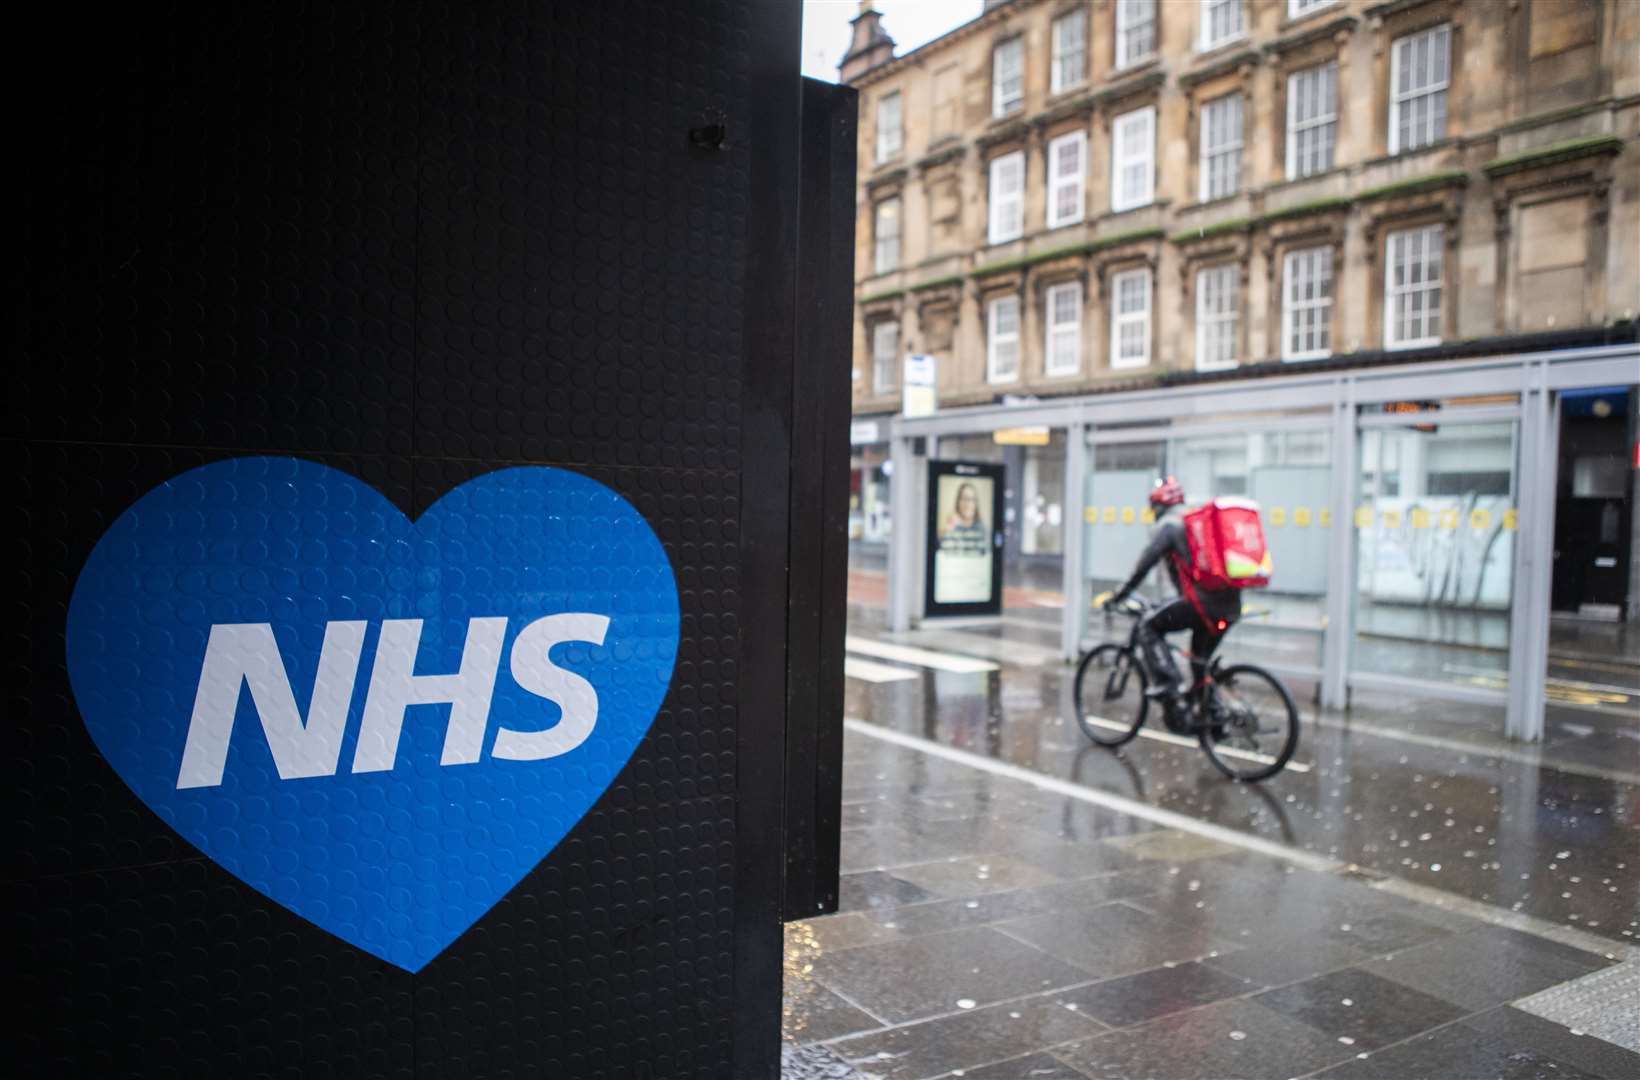 A member of the public cycles past an NHS love heart sign in Glasgow (Jane Barlow/PA)